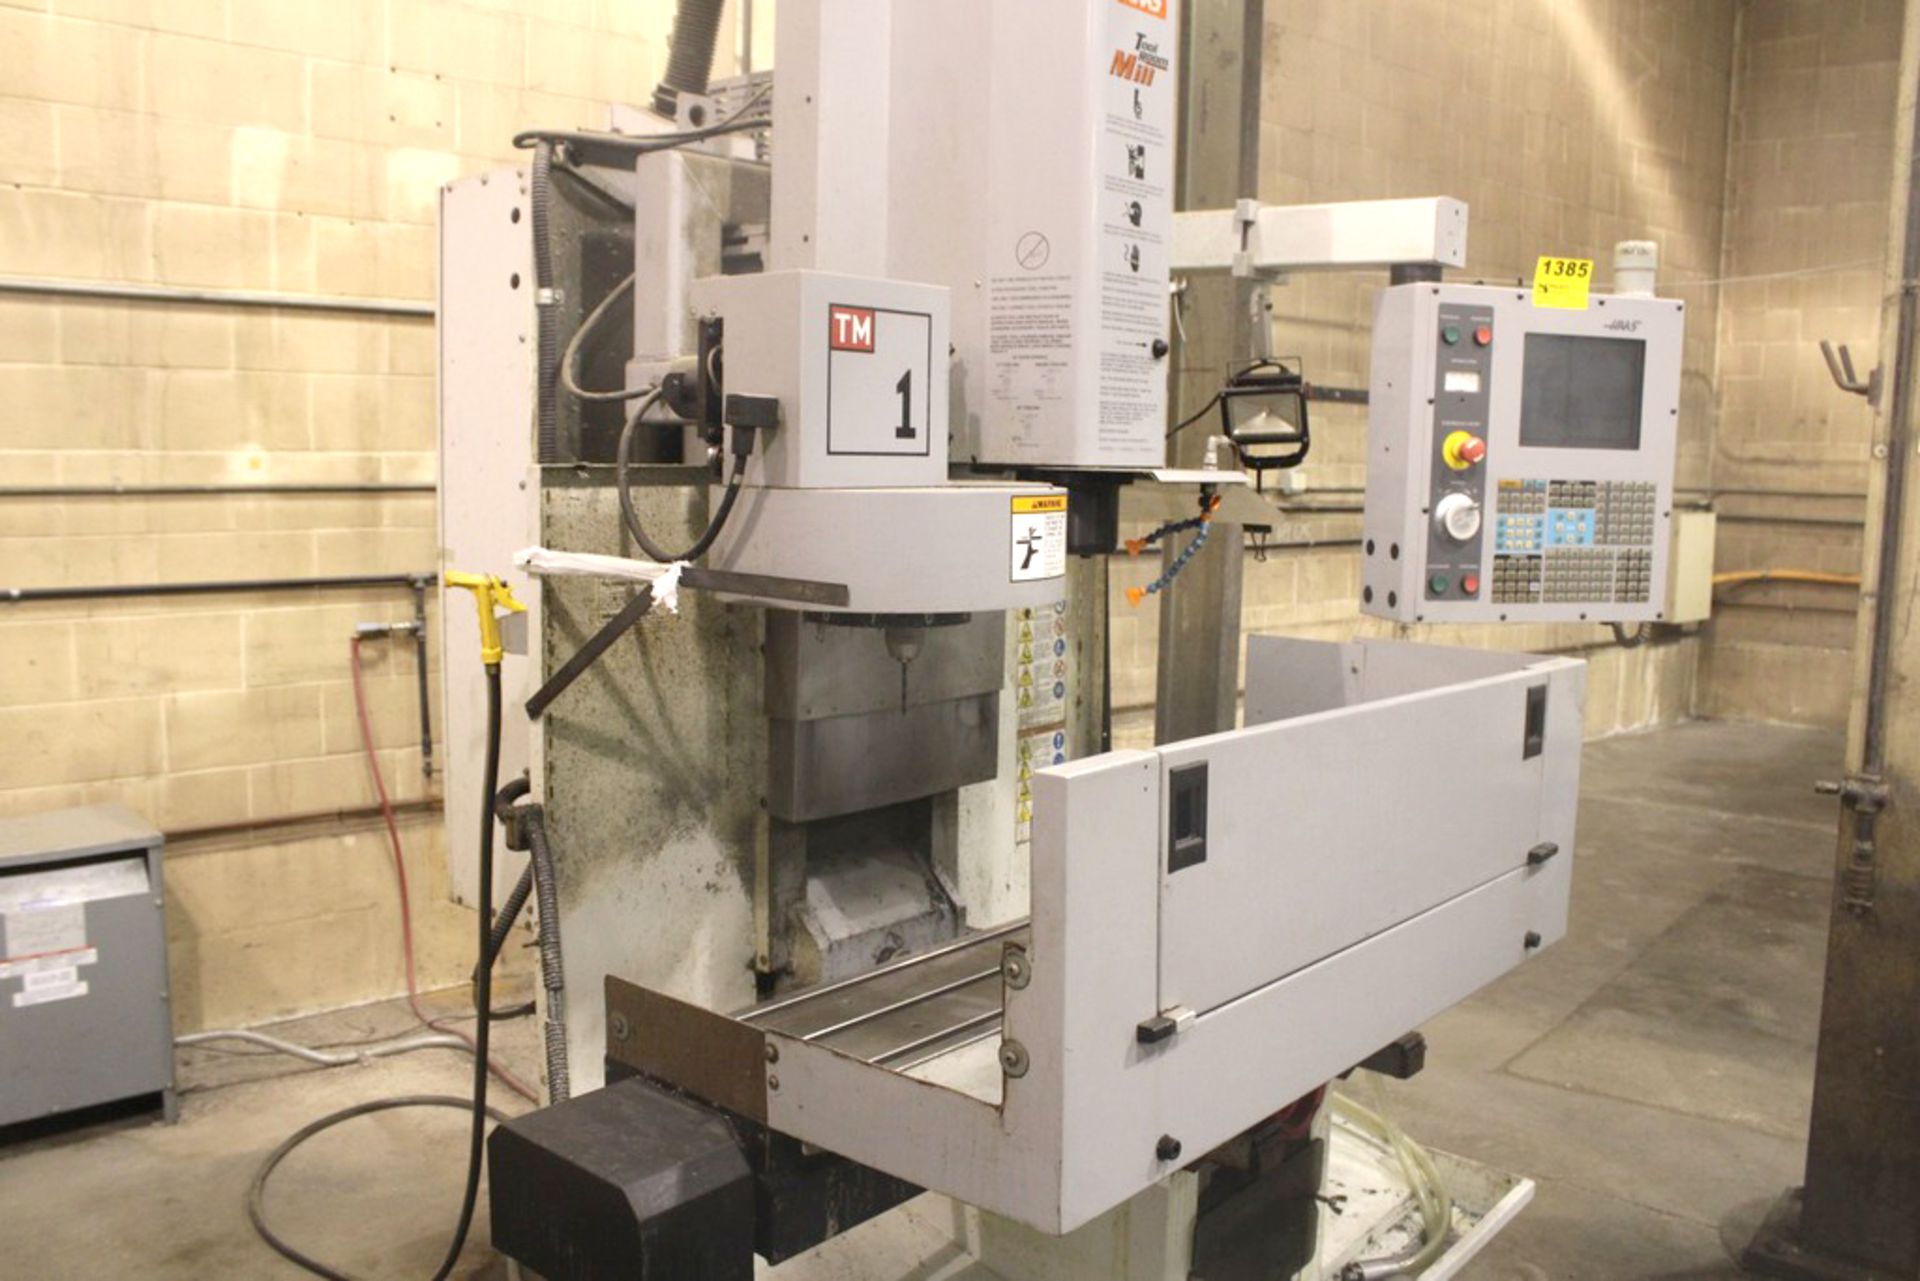 HAAS MODEL TM-1 CNC VERTICAL TOOL ROOM MILL, S/N 46006 (NEW 2005), 30” X-AXIS TRAVEL, 12” Y-AXIS - Image 9 of 9